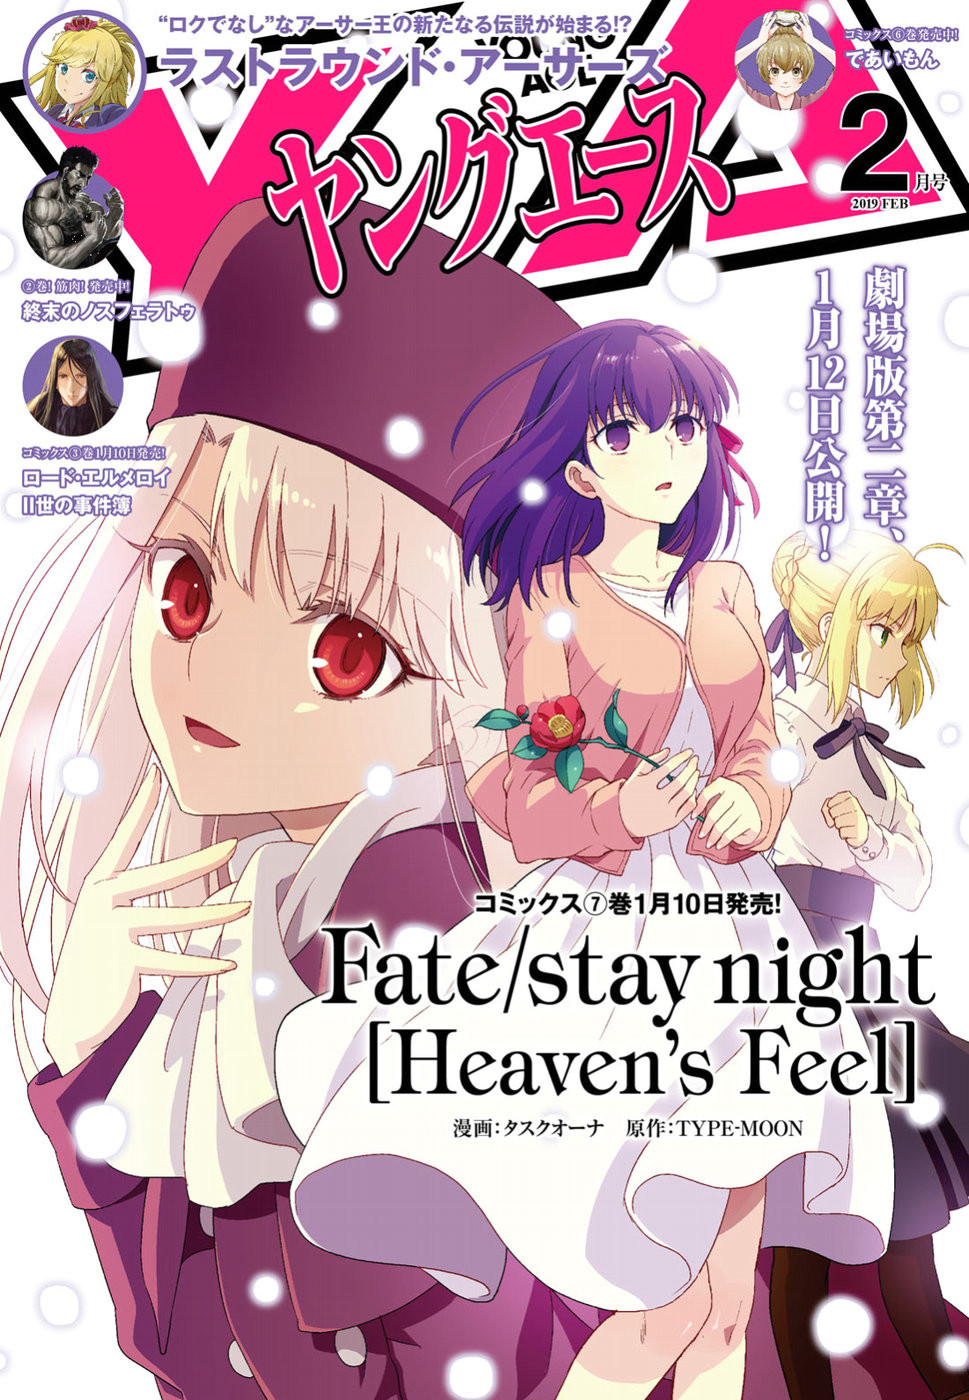 Fate/Stay night Heaven's Feel - Chapter 45 - Page 1